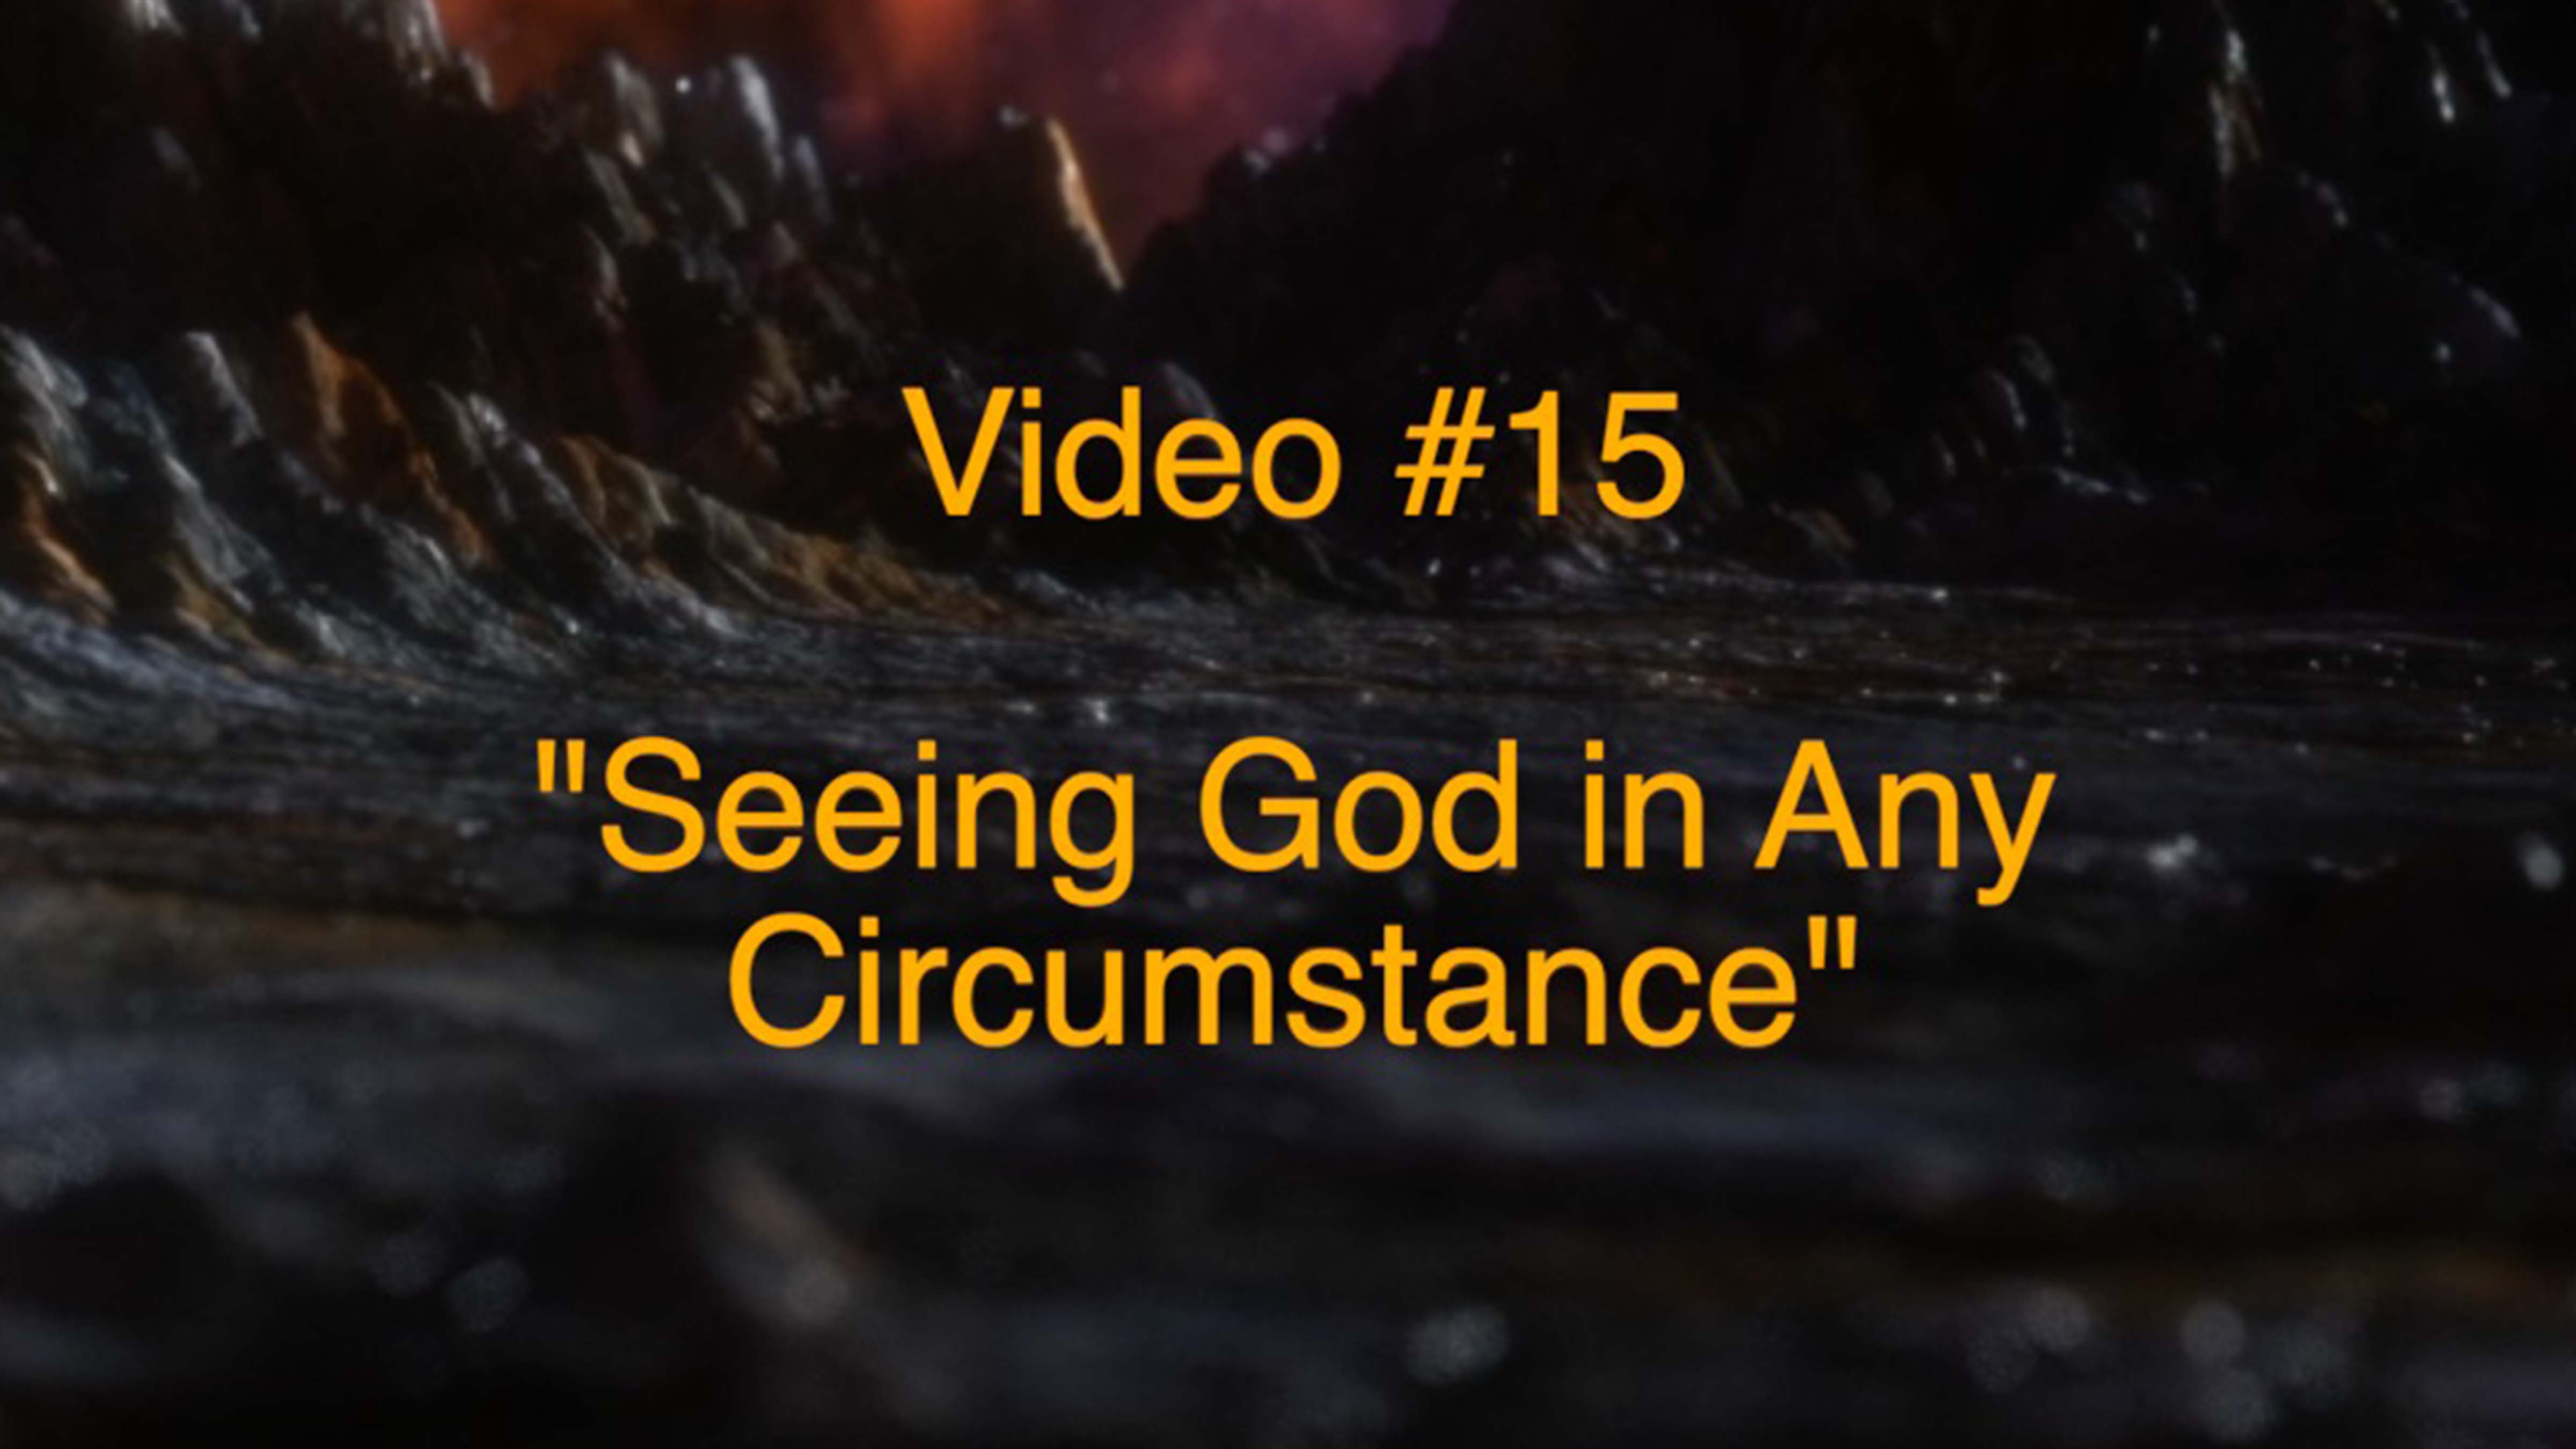 Seeing God in Any Circumstance